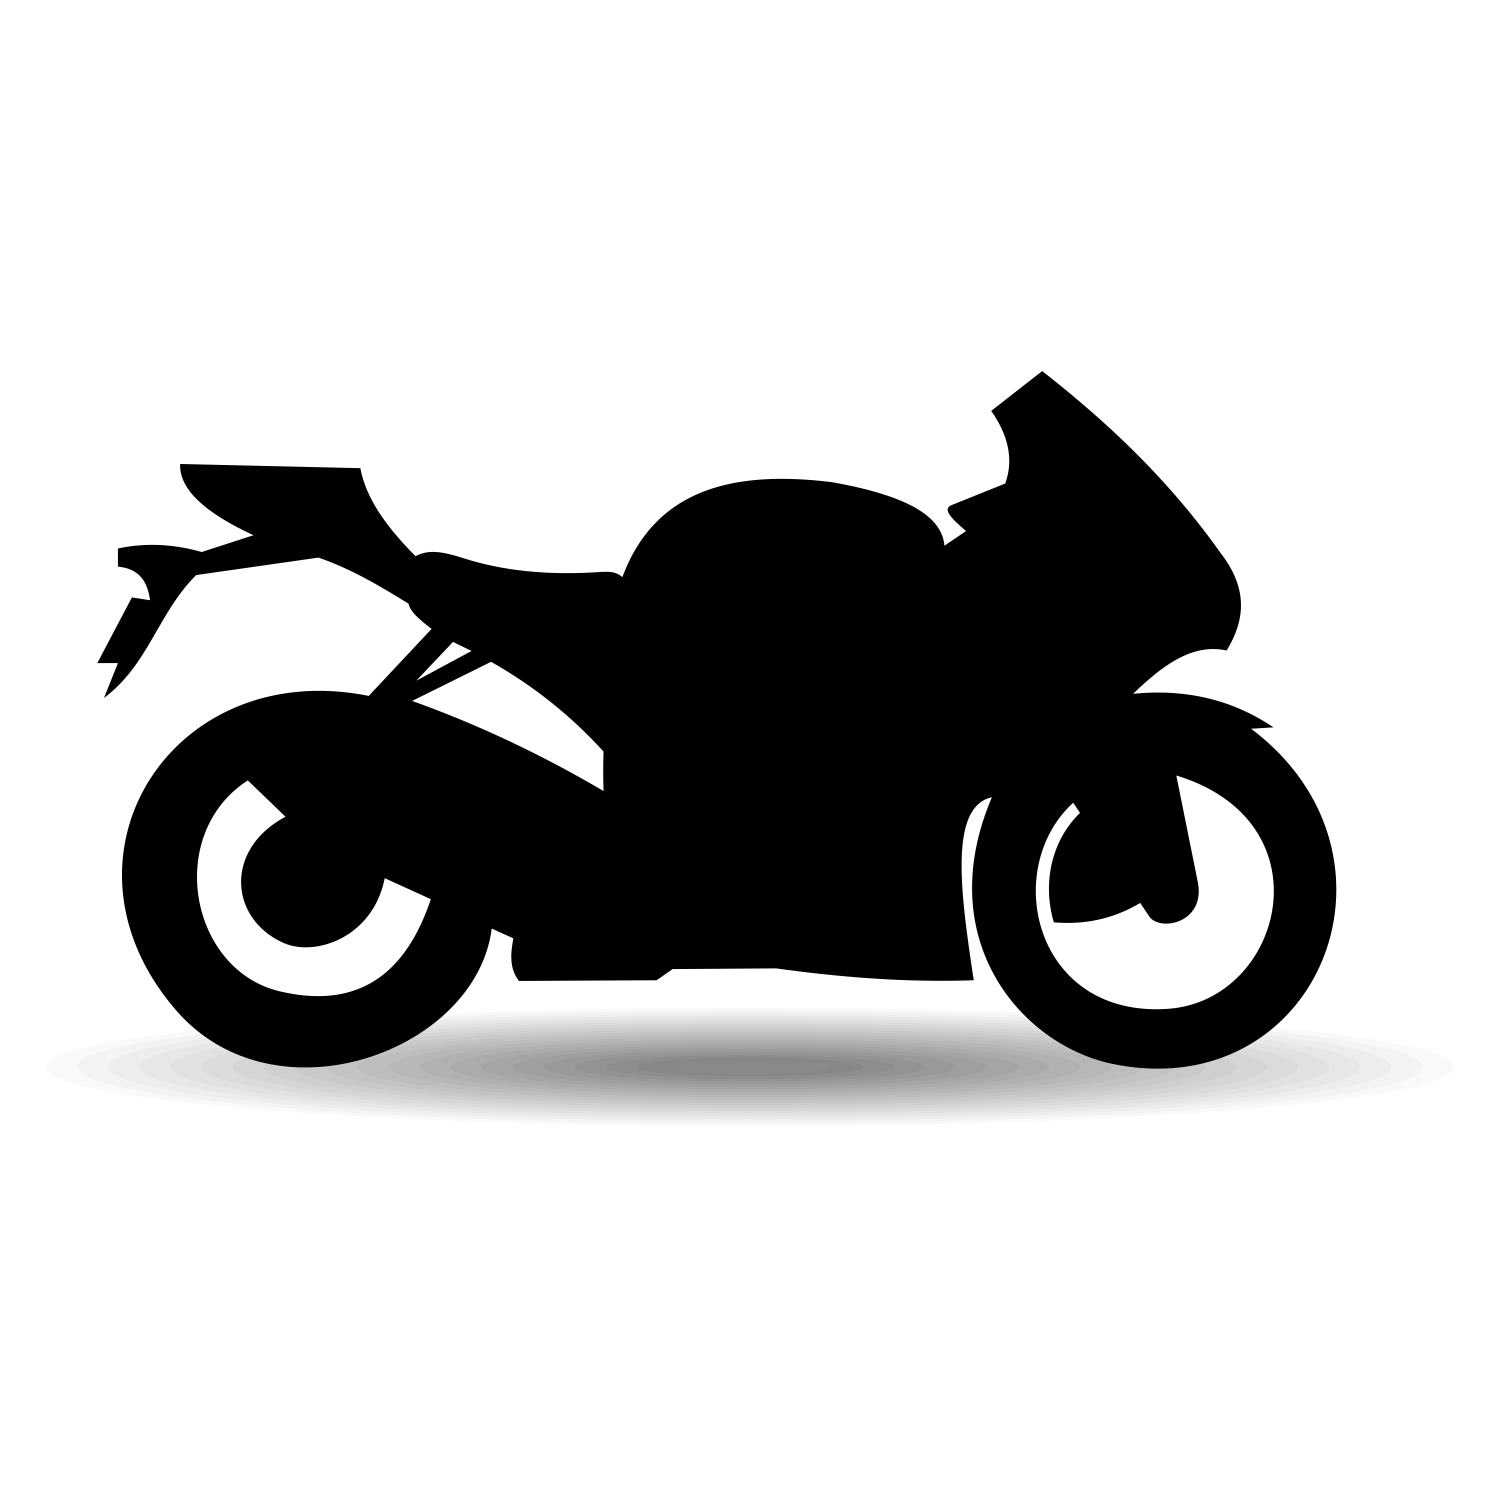 vector free download motorcycle - photo #25